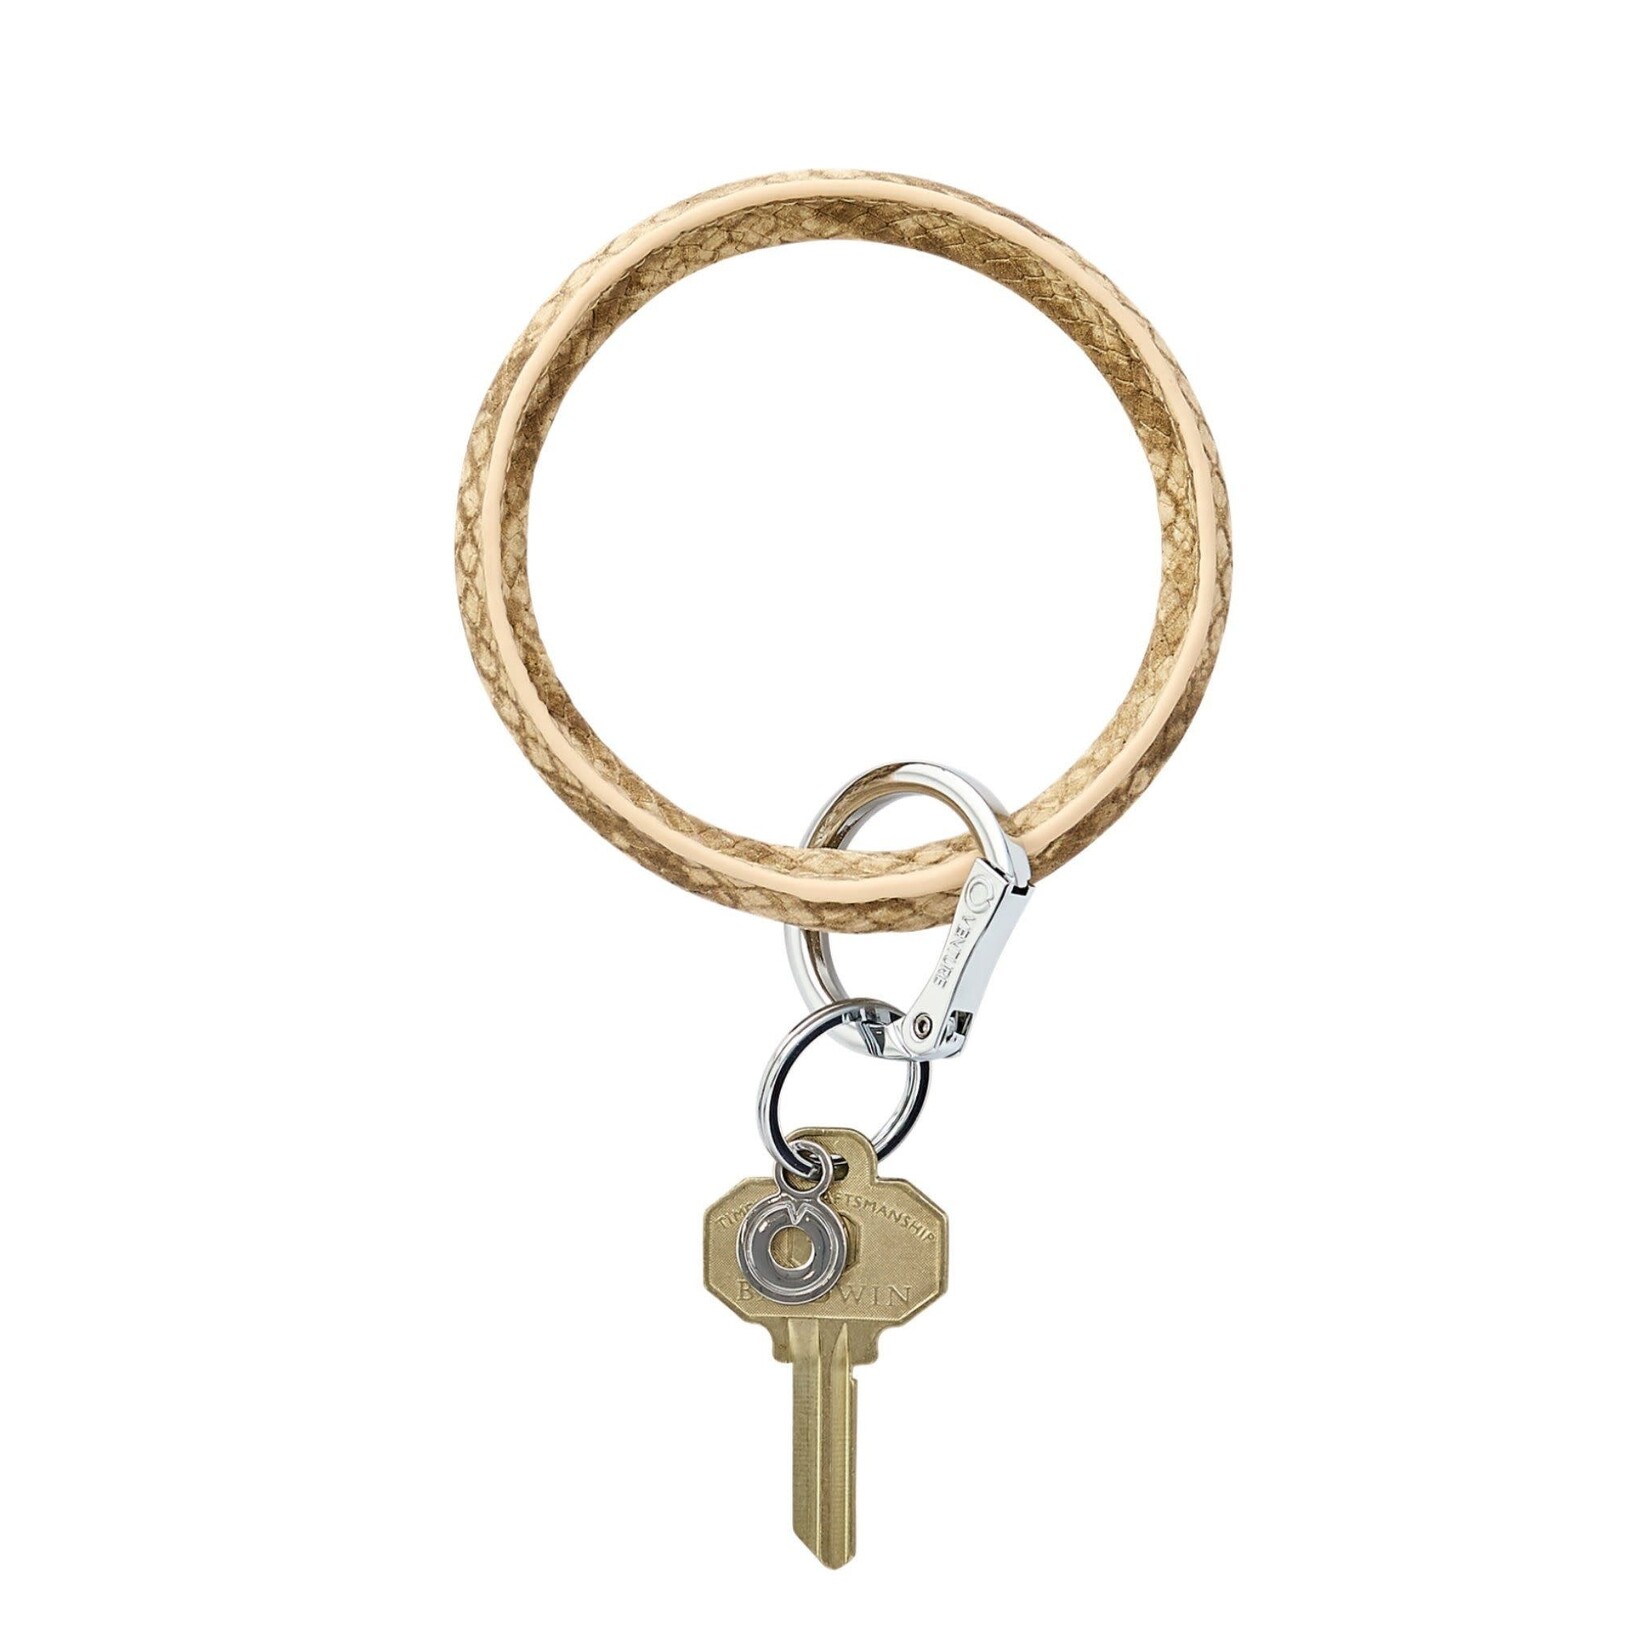 Oventure Leather Big O® Key Ring  in On The Beach of Animal Print Collection